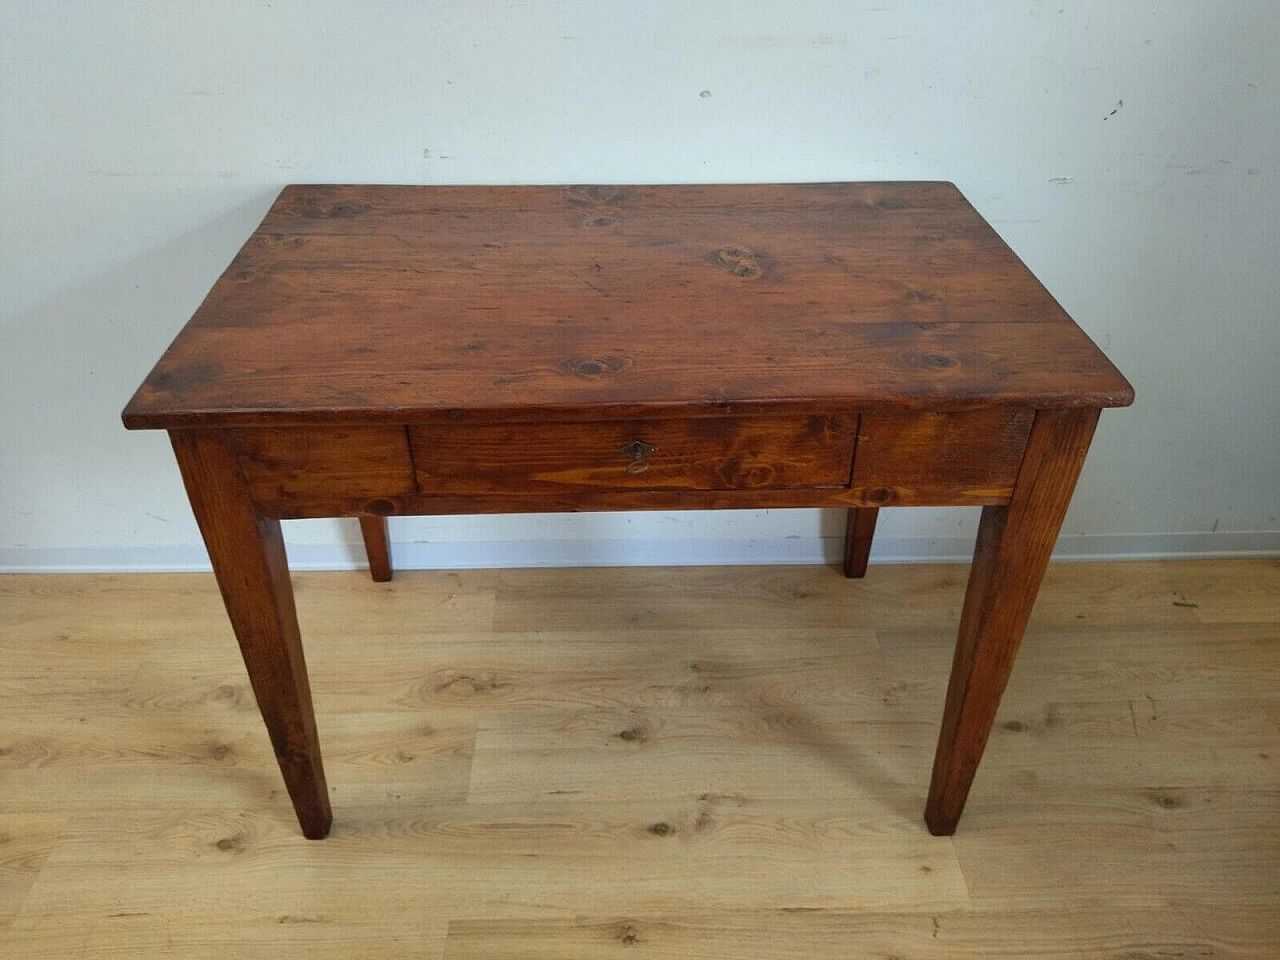 Walnut-stained solid spruce desk, late 19th century 1